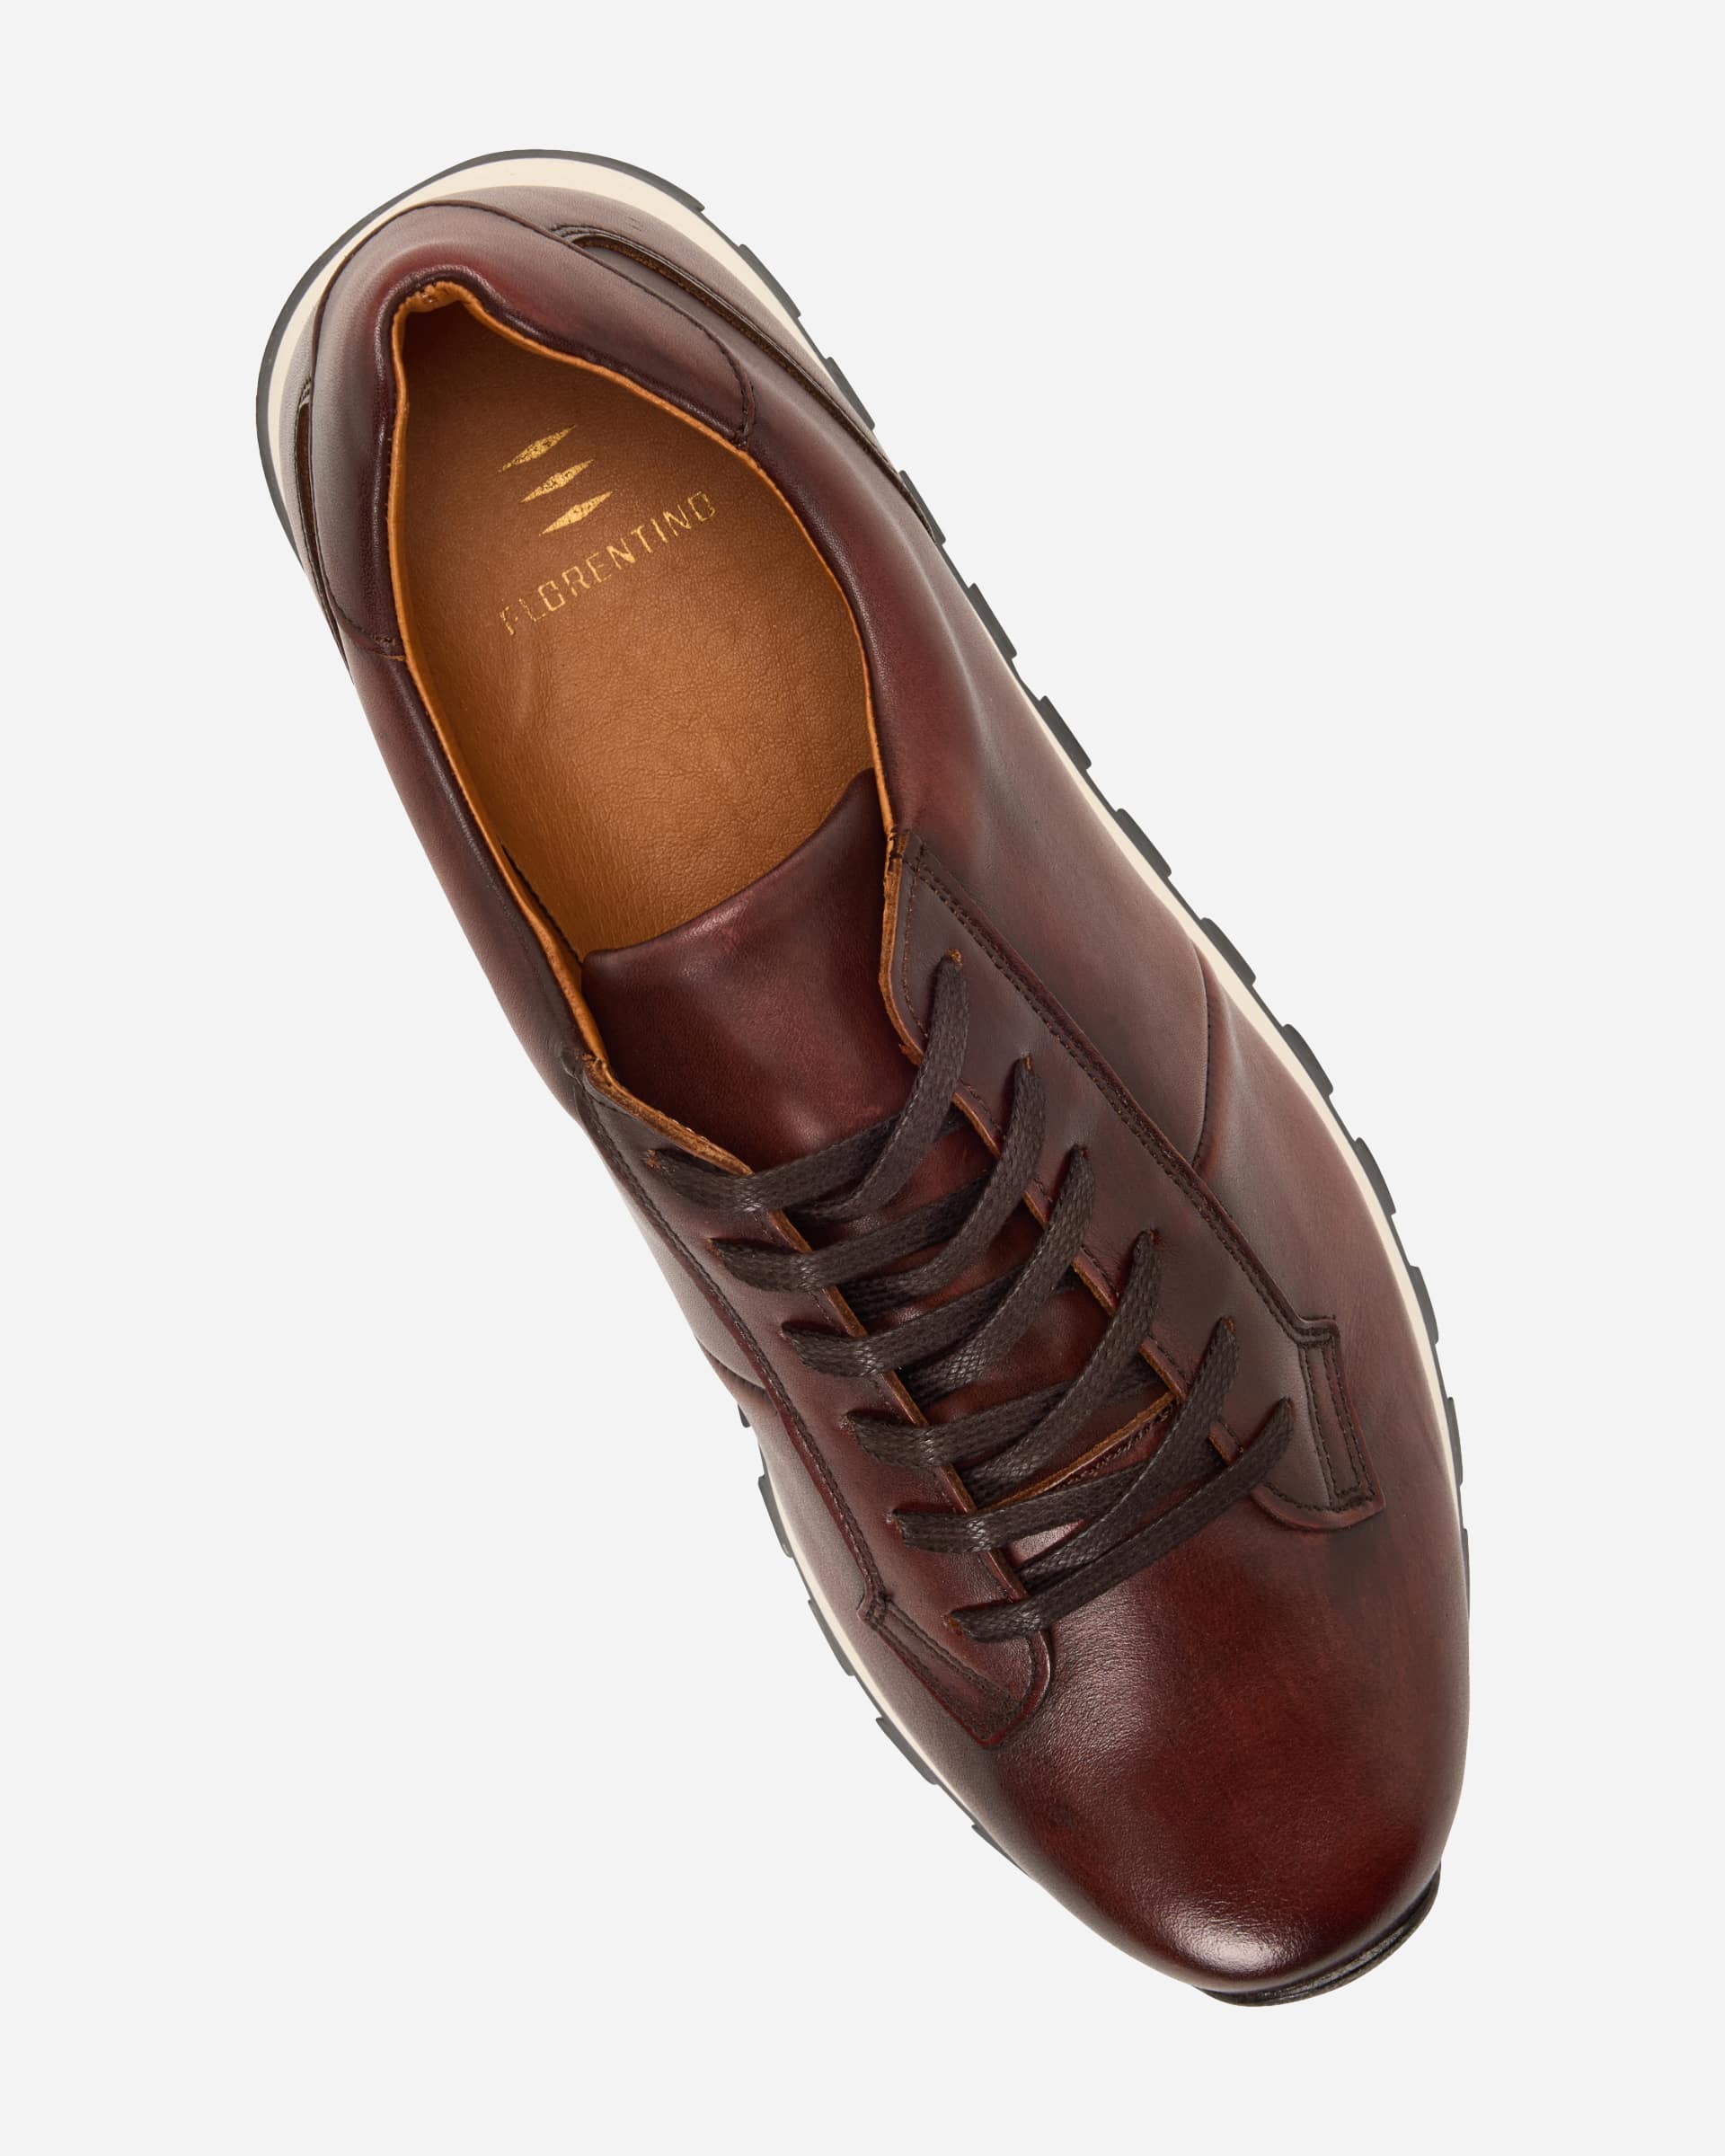 Sports Leather Sneaker - Men's Sneakers at Menzclub